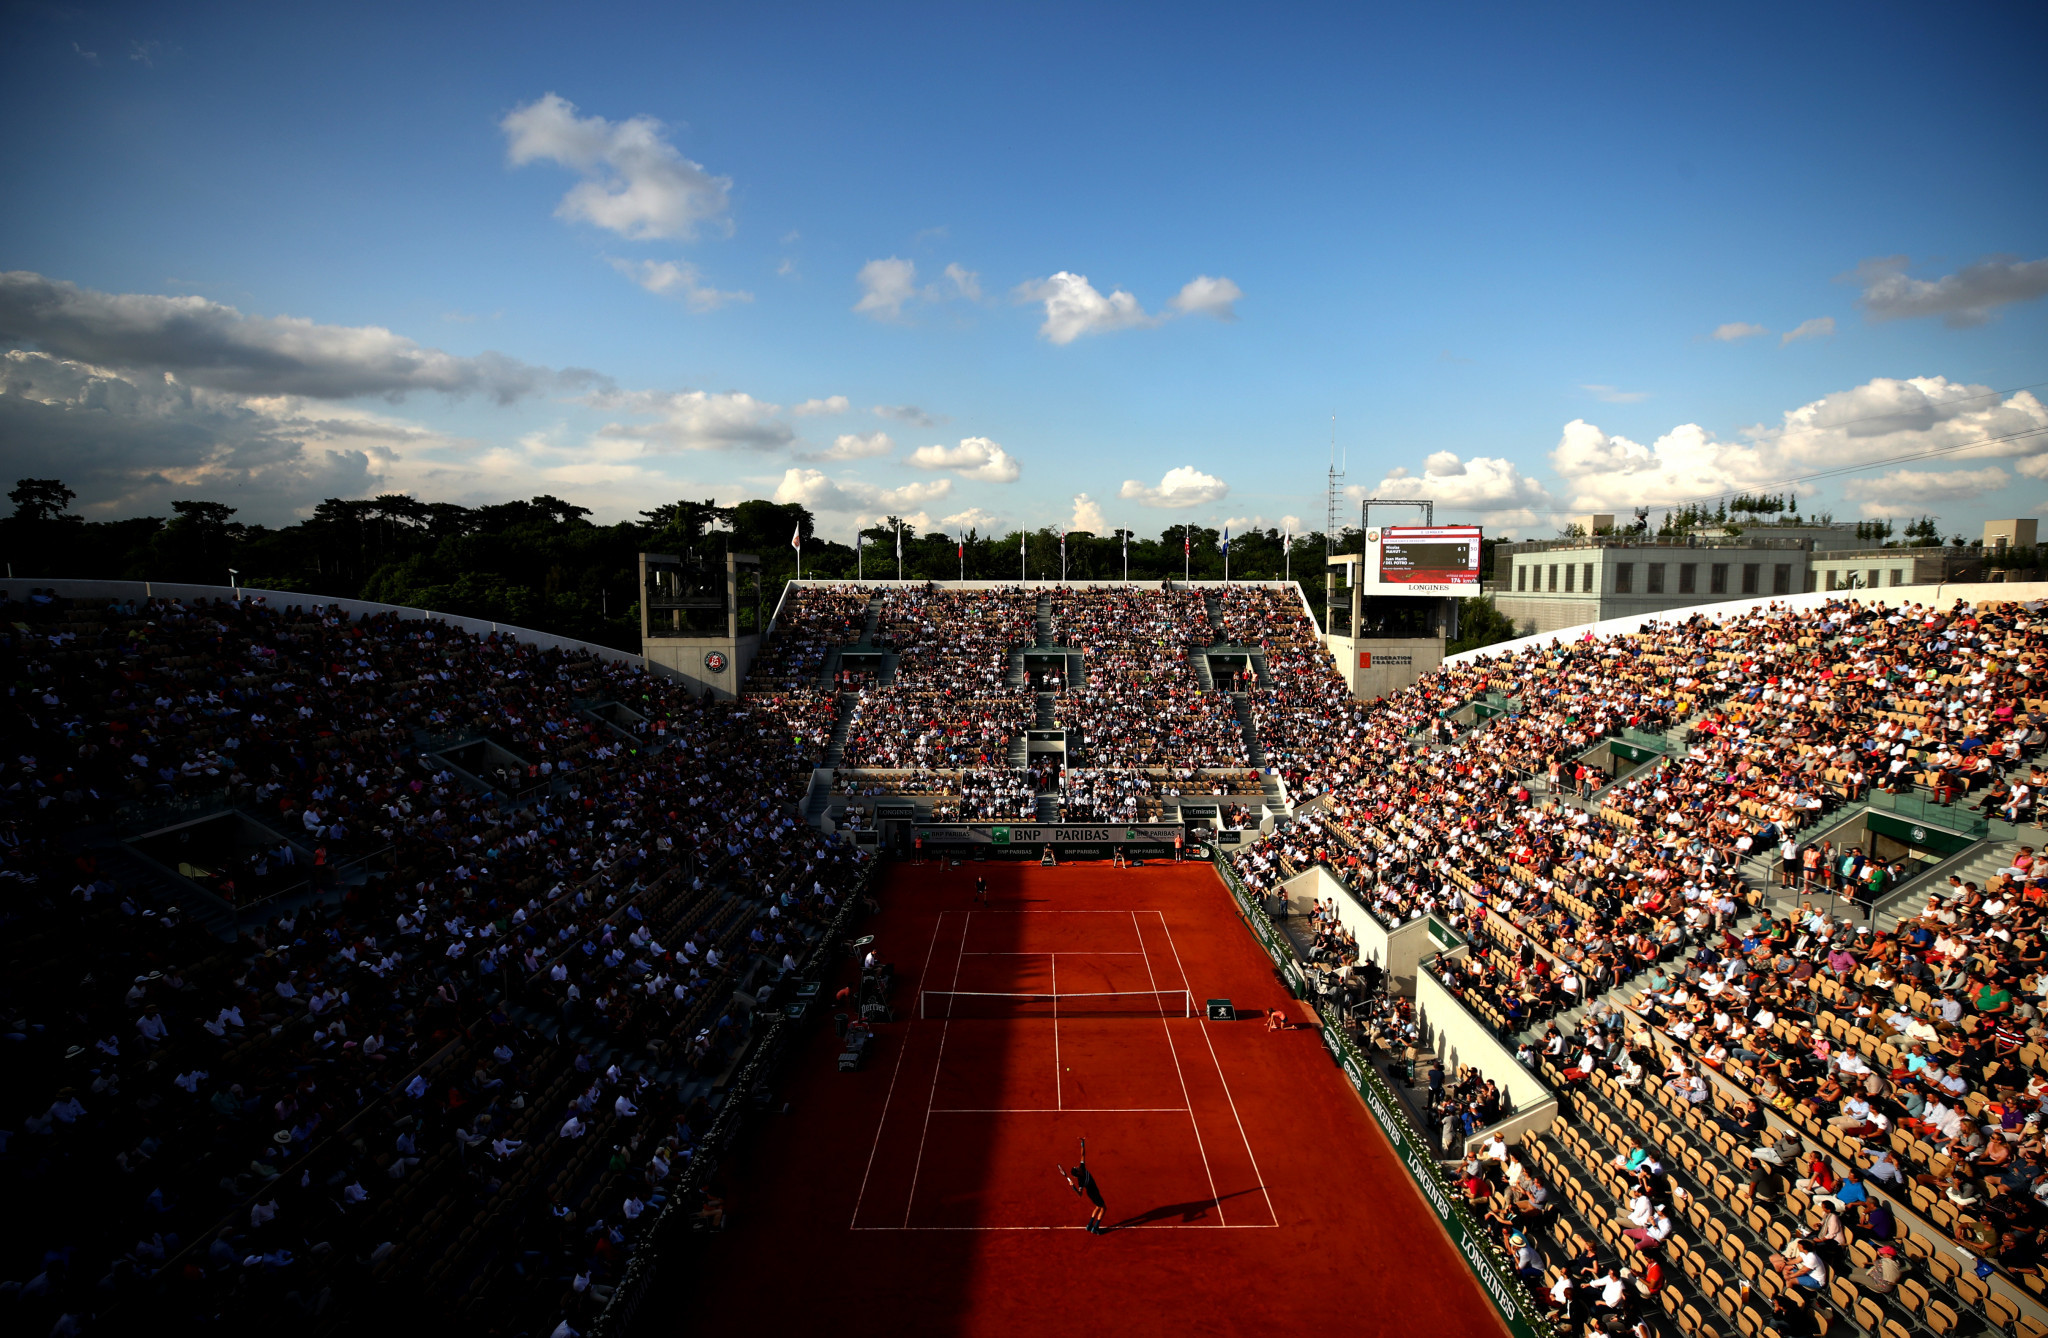 Court Suzanne Lenglen in Paris to receive cover for new roof in time for 2024 Olympics 